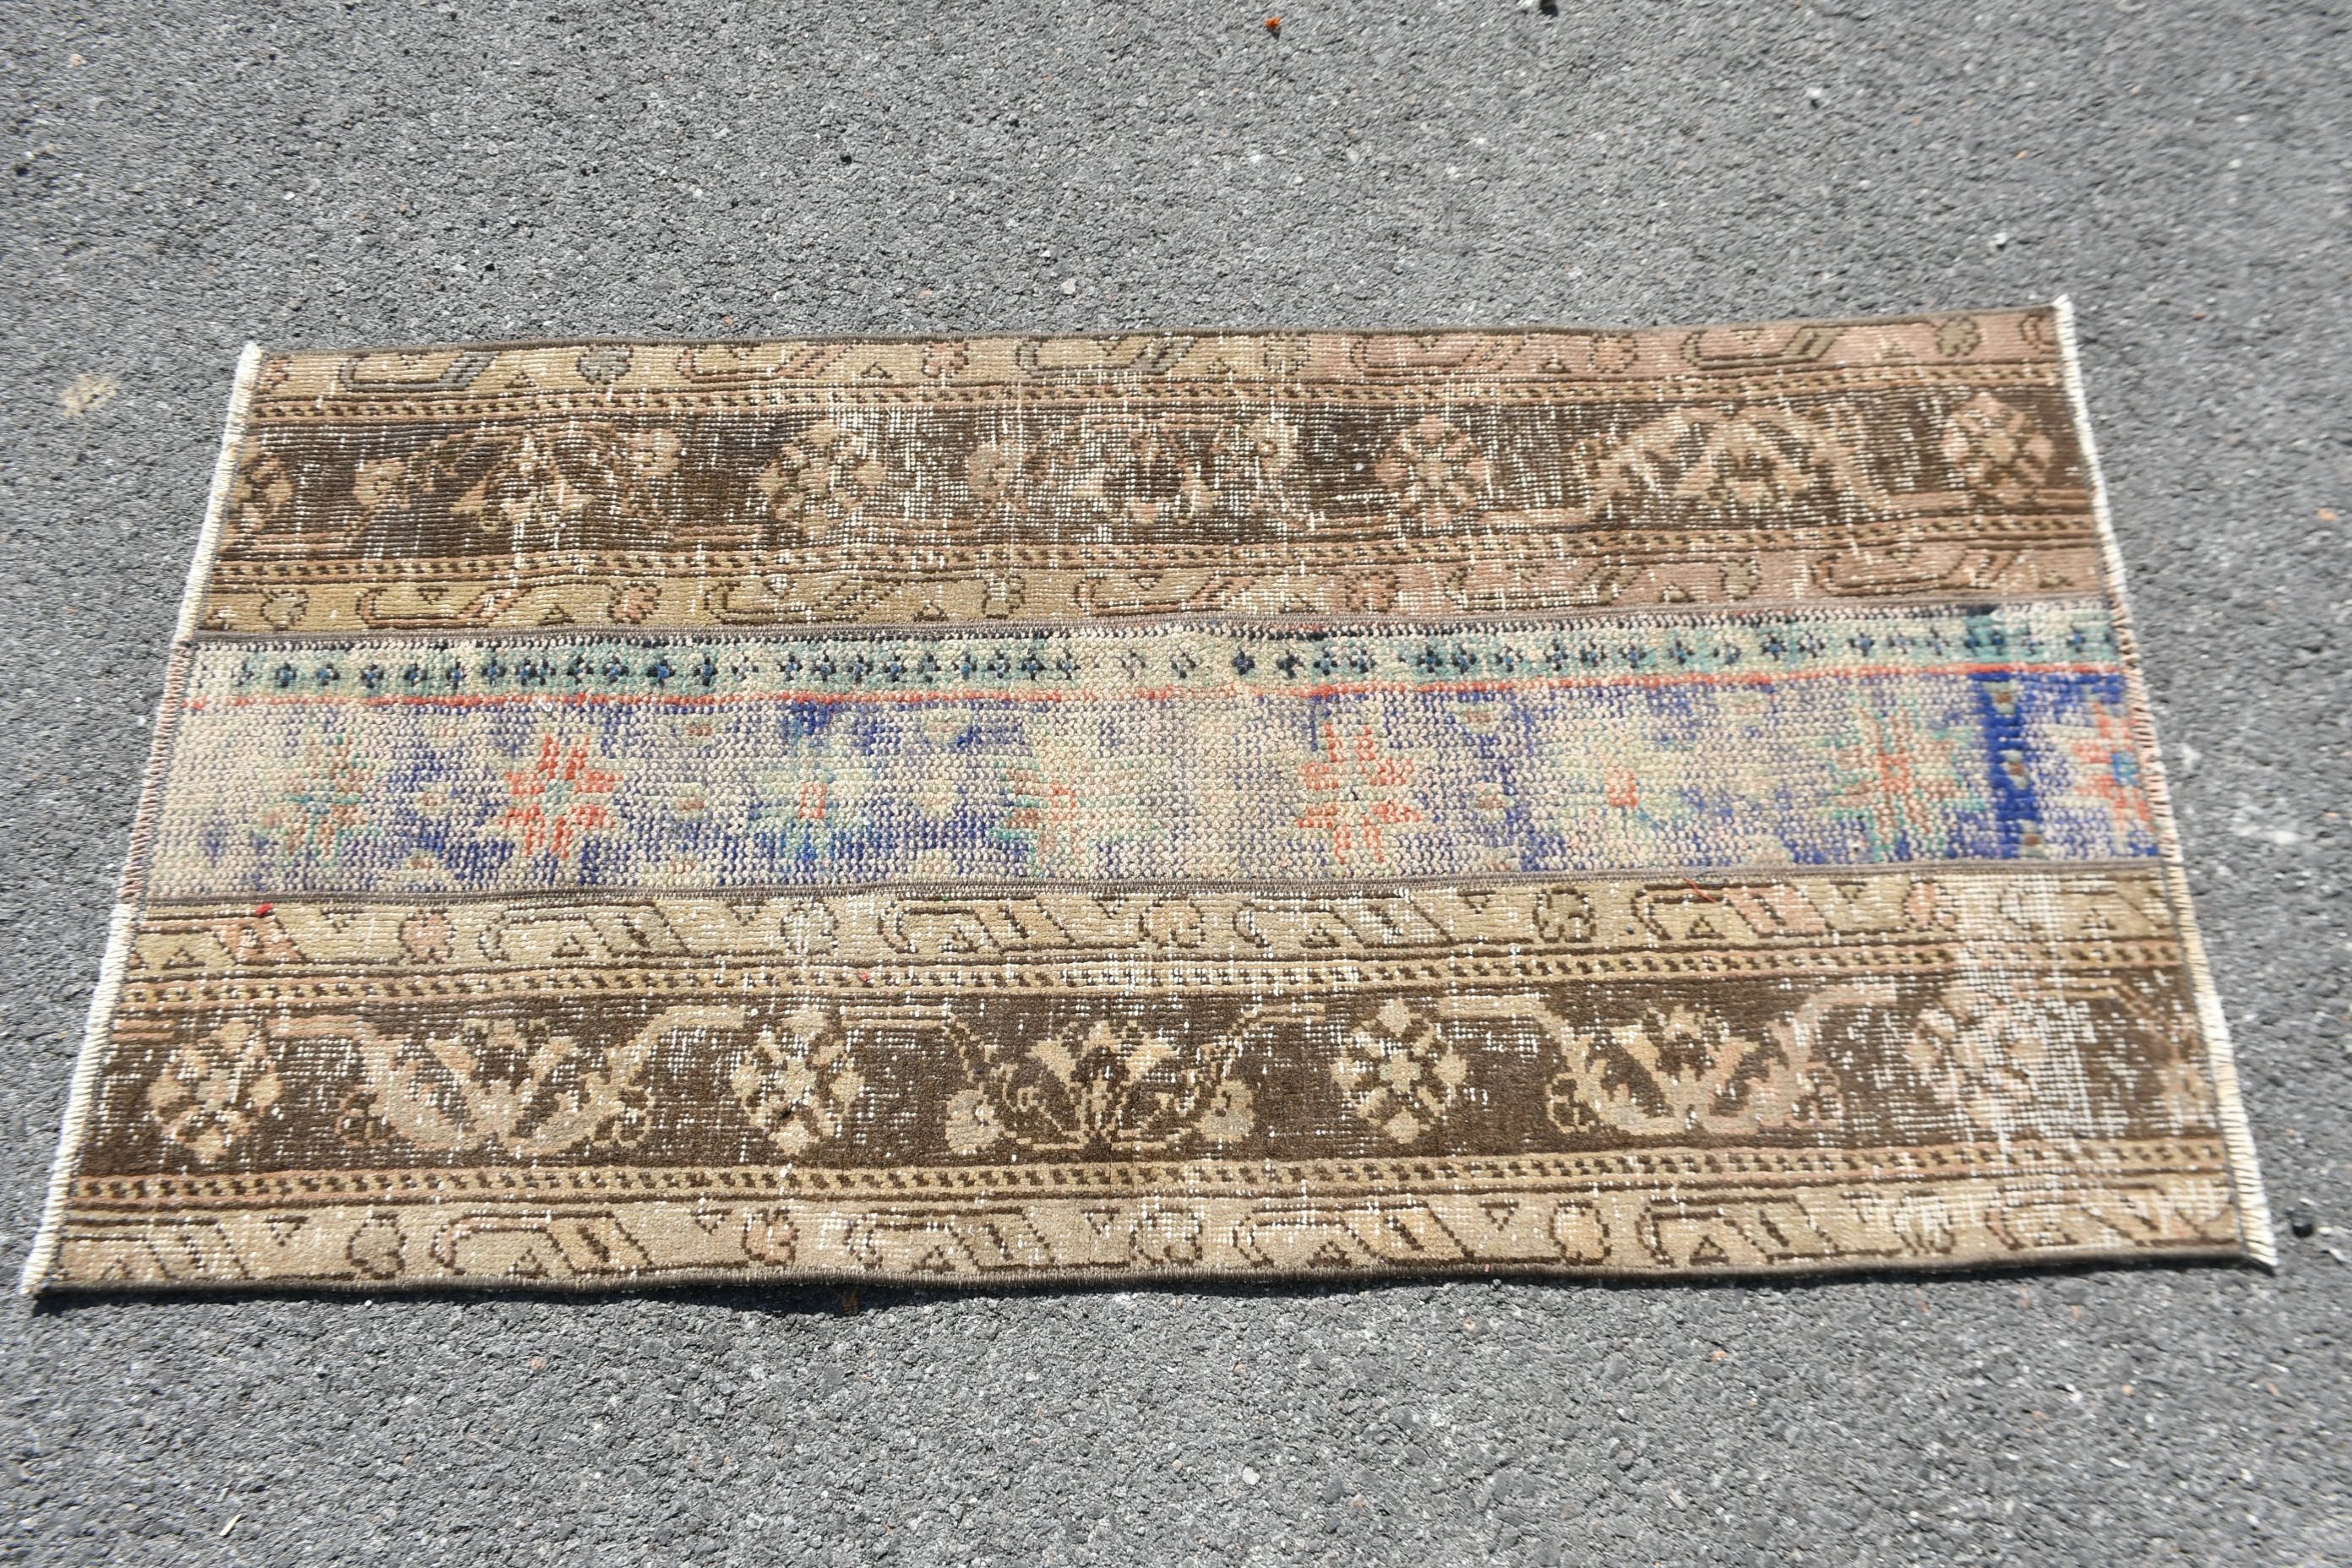 Vintage Rug, Rugs for Wall Hanging, 2.2x4.2 ft Small Rug, Bedroom Rug, Turkish Rugs, Kitchen Rugs, Brown Antique Rug